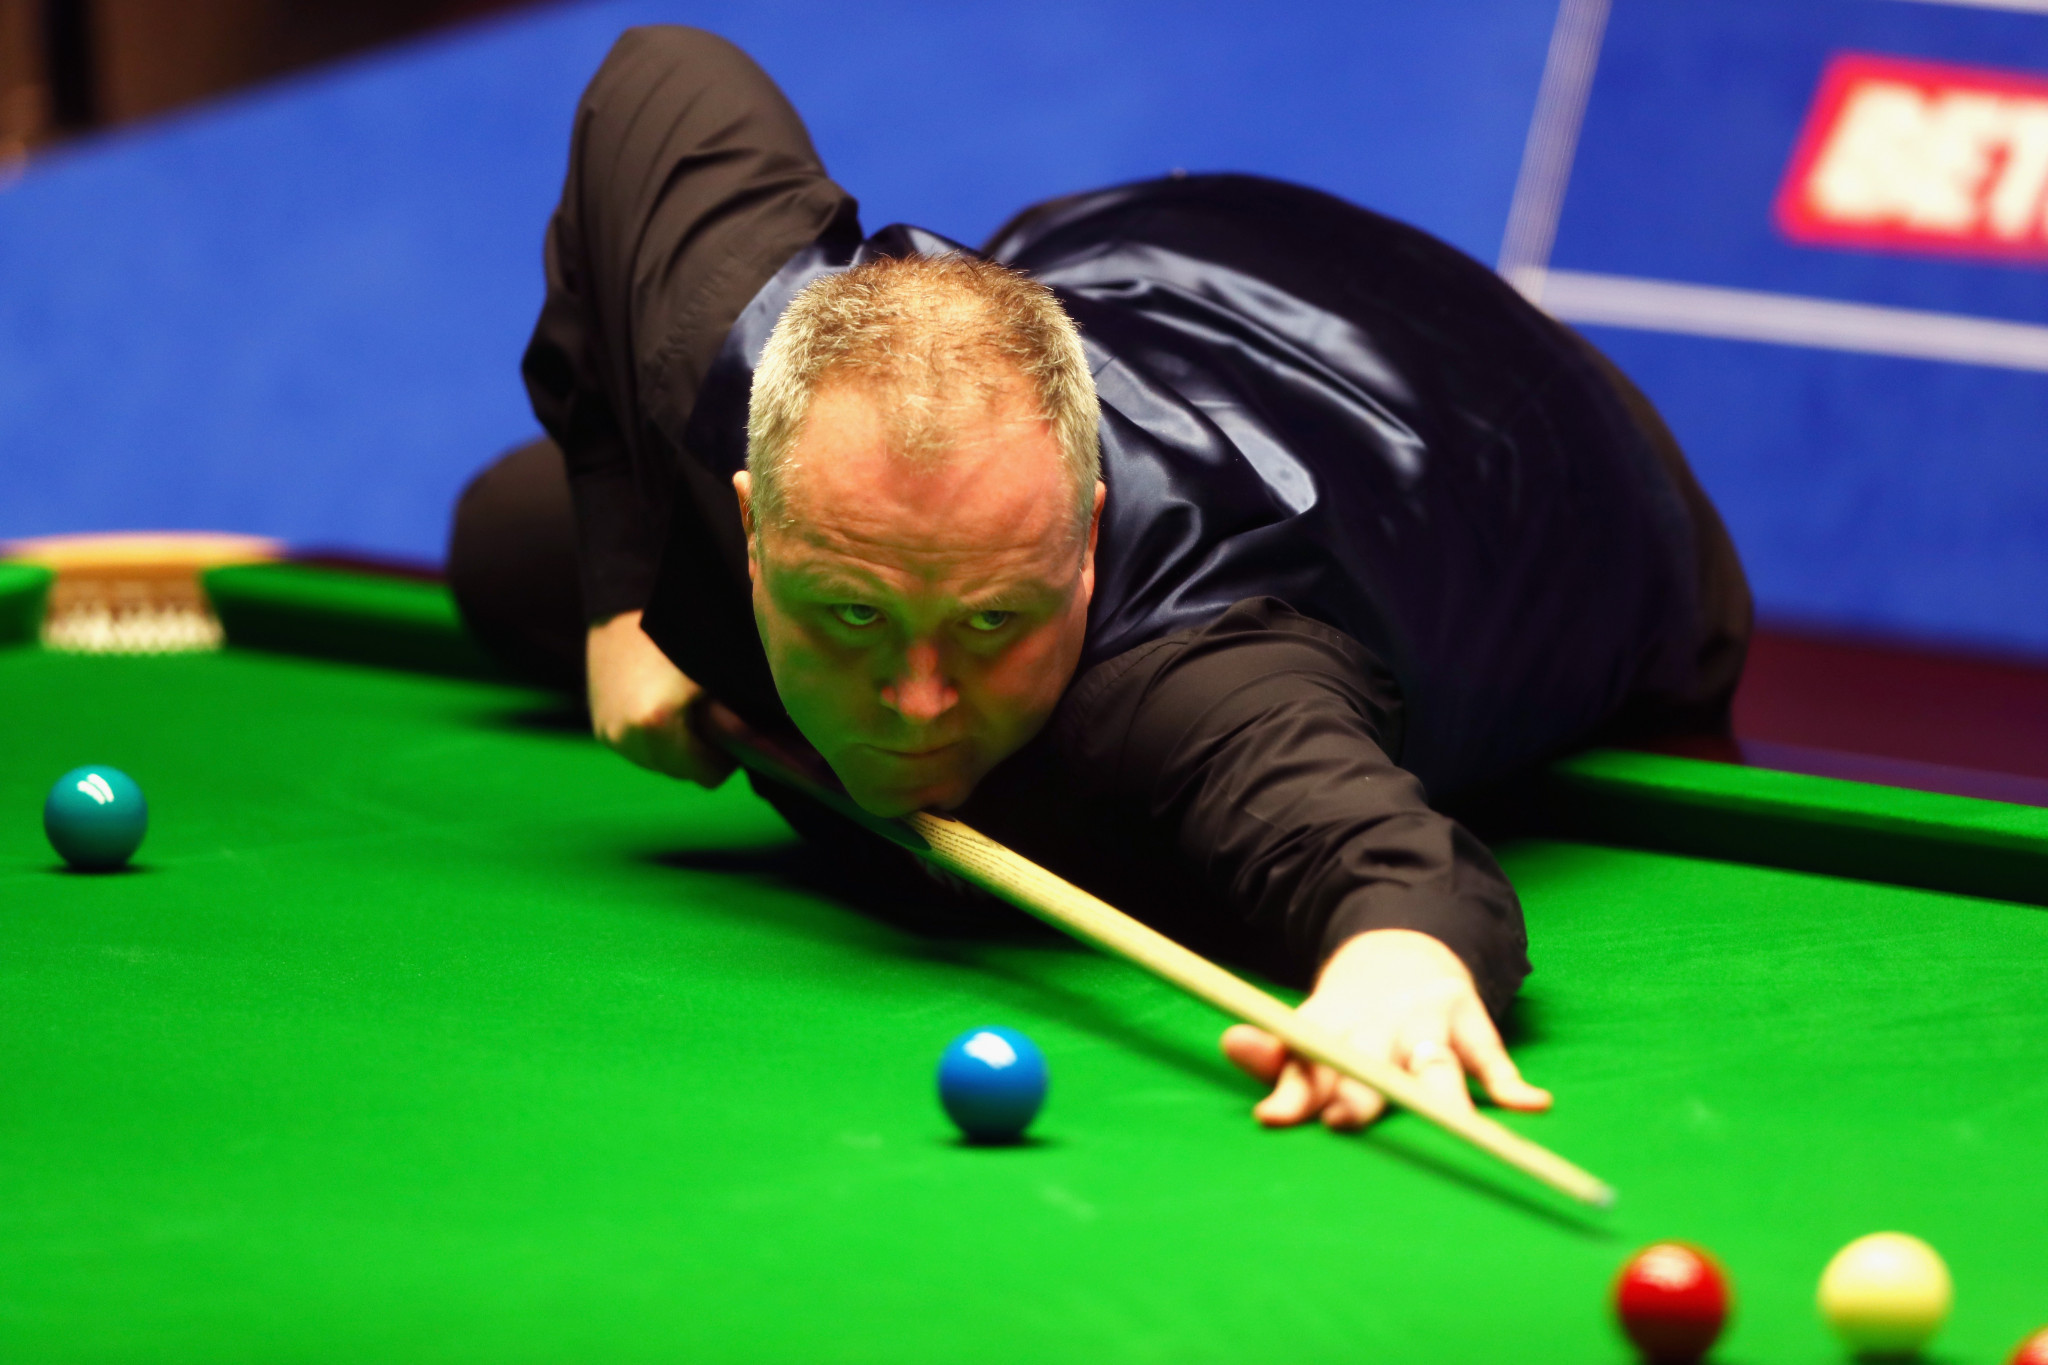 Four-time winner John Higgins has booked his place in the quarter-finals of the World Snooker Championships ©Getty Images